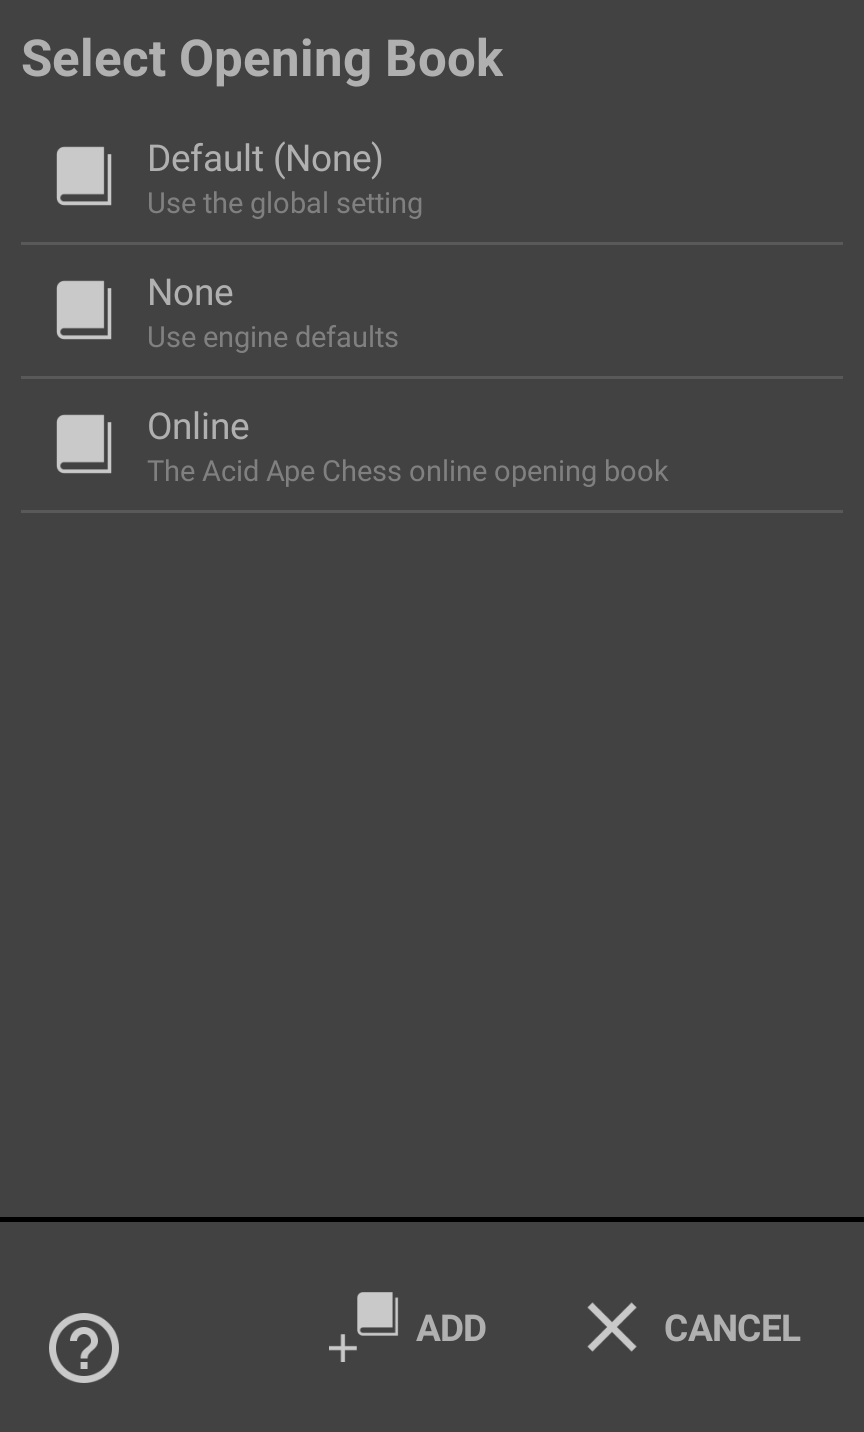 The opening book selection dialog